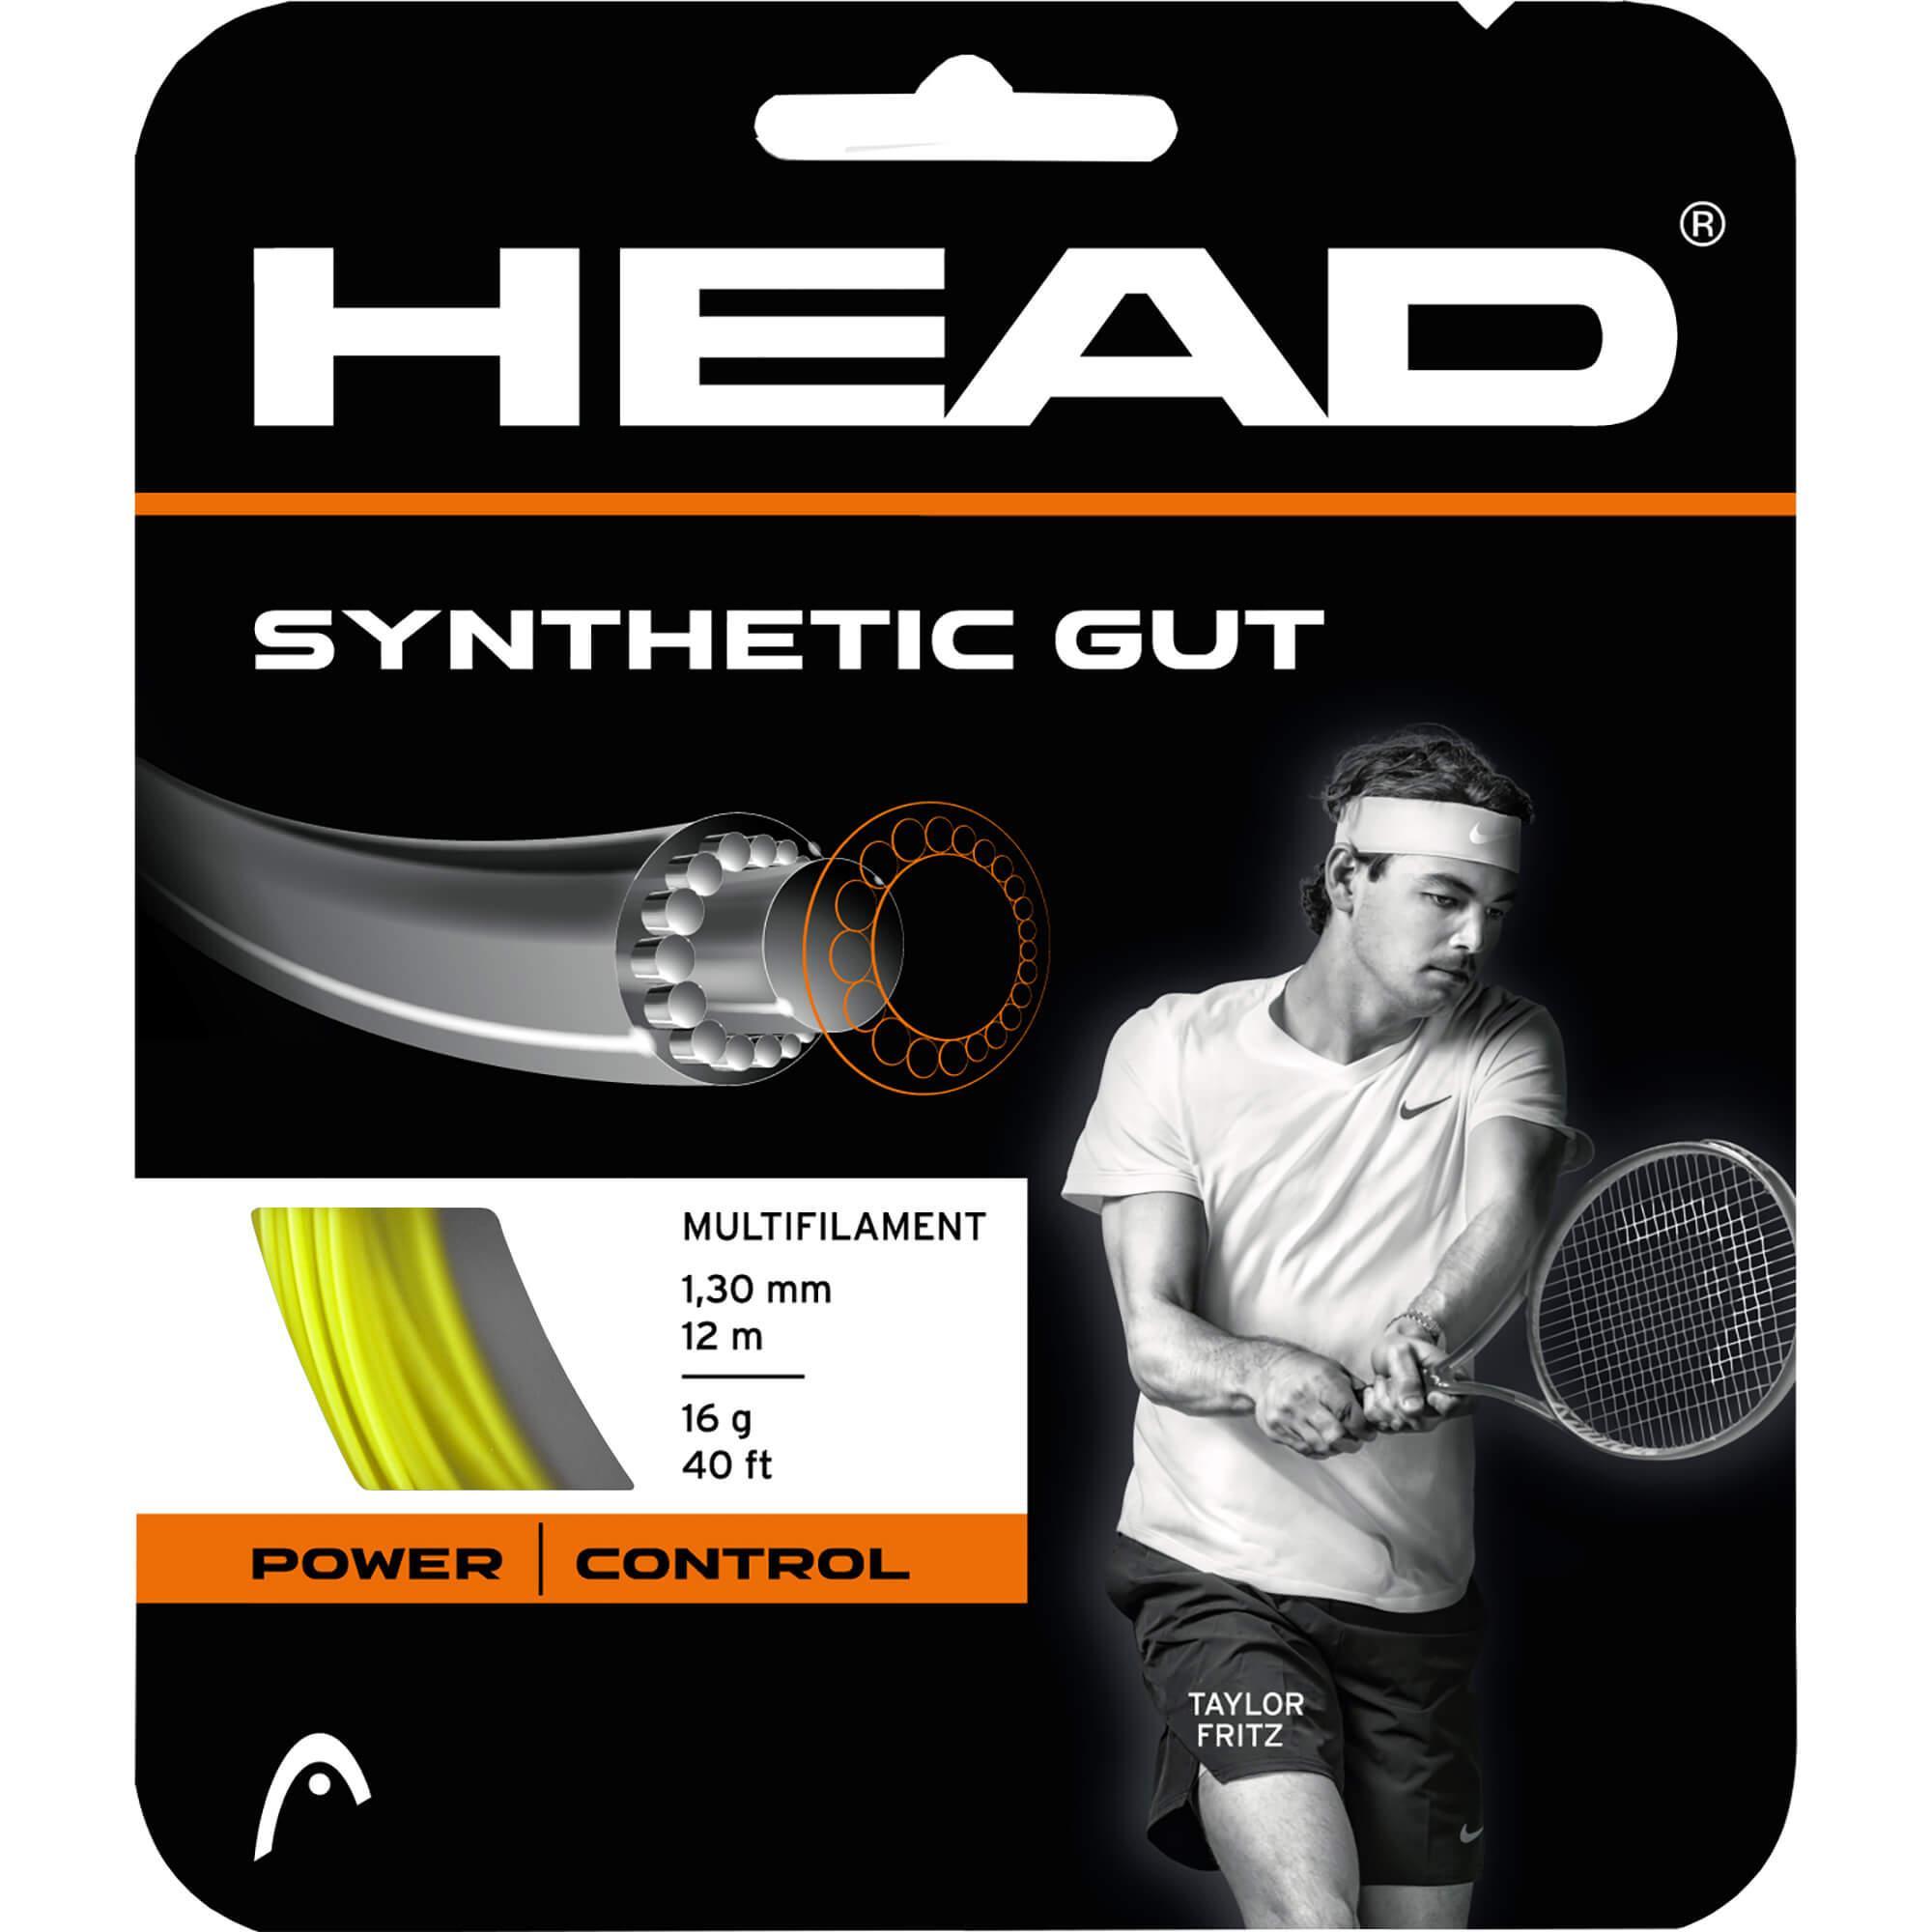 Head Synthetic Gut 1.30mm 12M Packet - Yellow